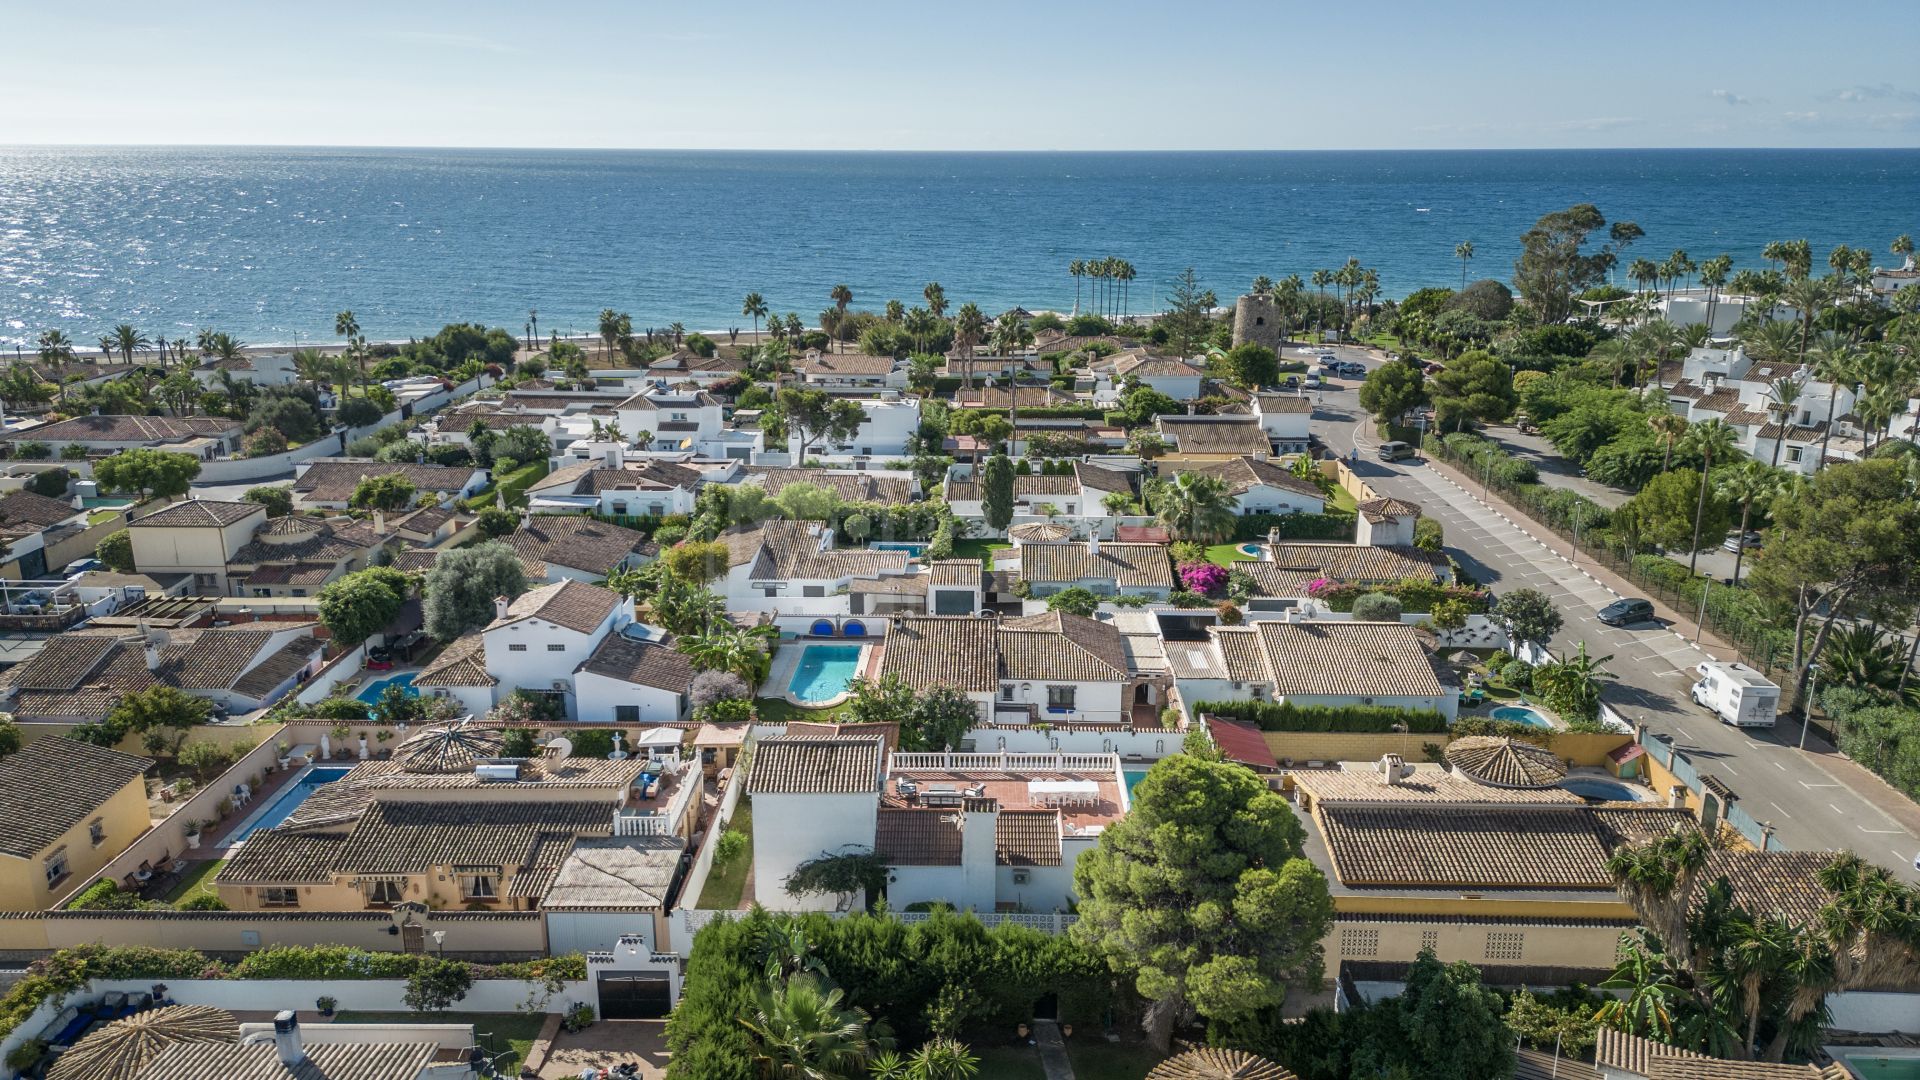 INVESTMENT OPPORTUNITY! 5-BEDROOM VILLA 200 METRES FROM THE BEACH, COSTALITA, ESTEPONA